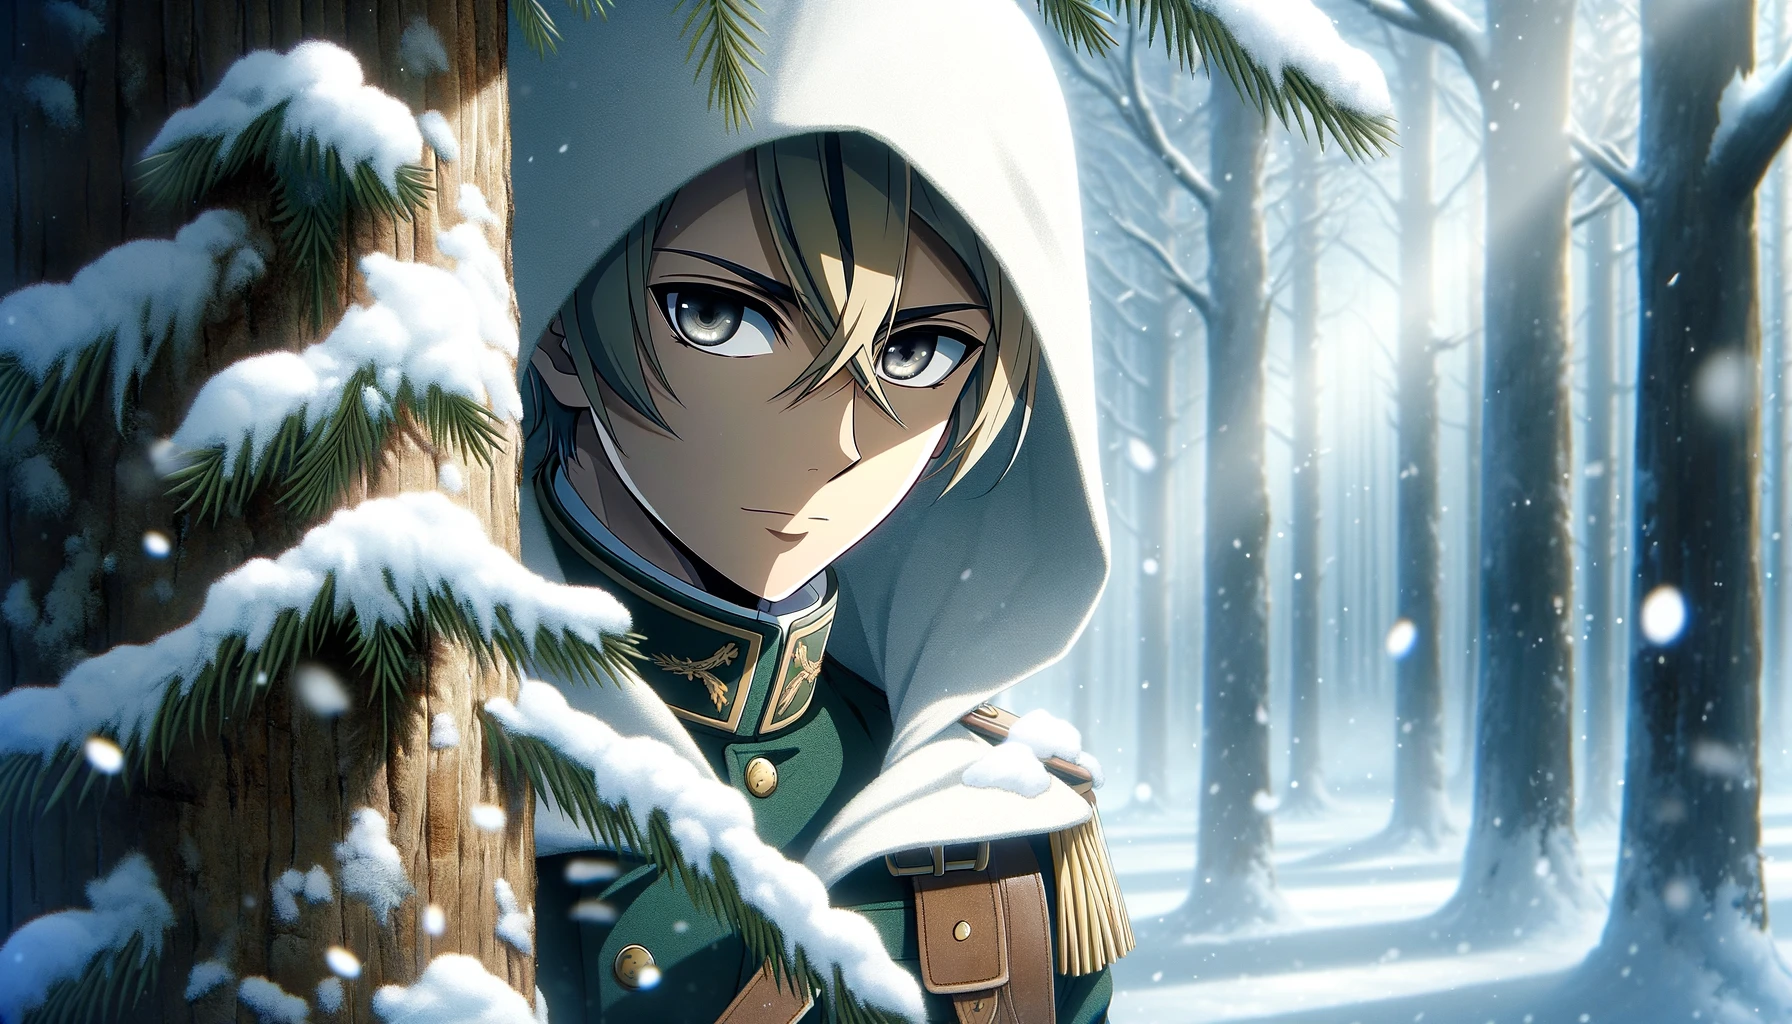 Anime-style image of a male character inspired by 'Golden Kamuy', presumed dead but shown alive in a dramatic reveal. He is peeking from behind a snow-covered tree in a wintry forest, wearing a military uniform with a white hood. His expression is mysterious and calculating, suggesting he has survived against all odds. The atmosphere is tense and suspenseful, with light snow falling around him.